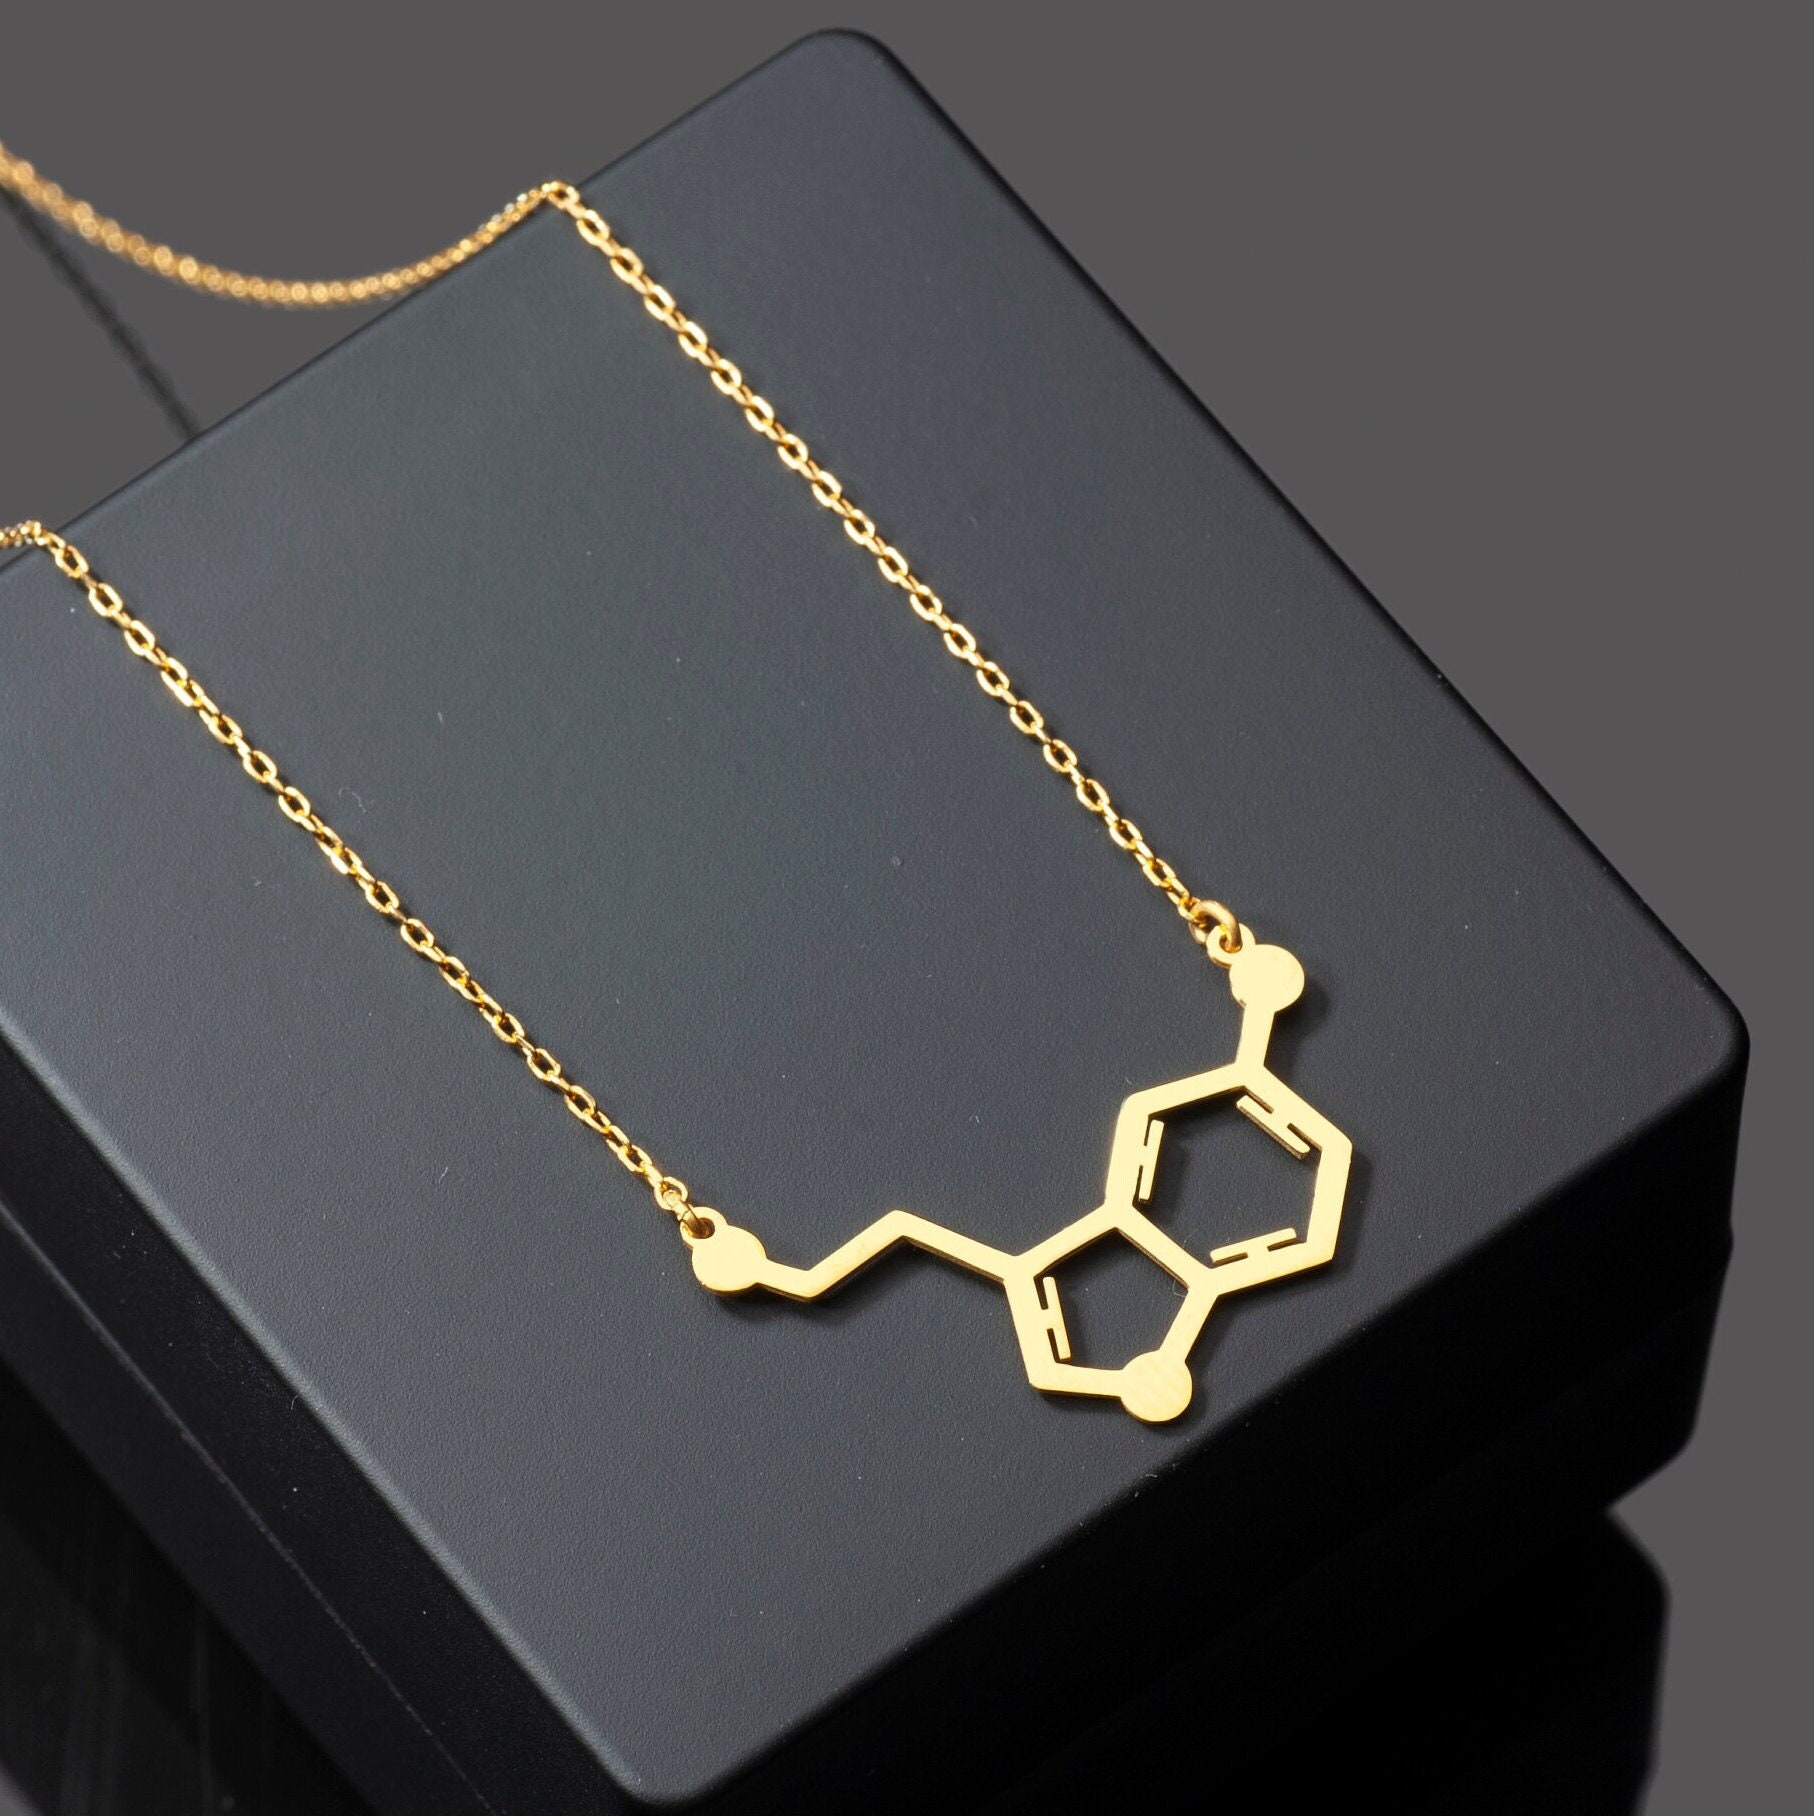 Theobromine molecule necklace in gold - Delftia science jewelry